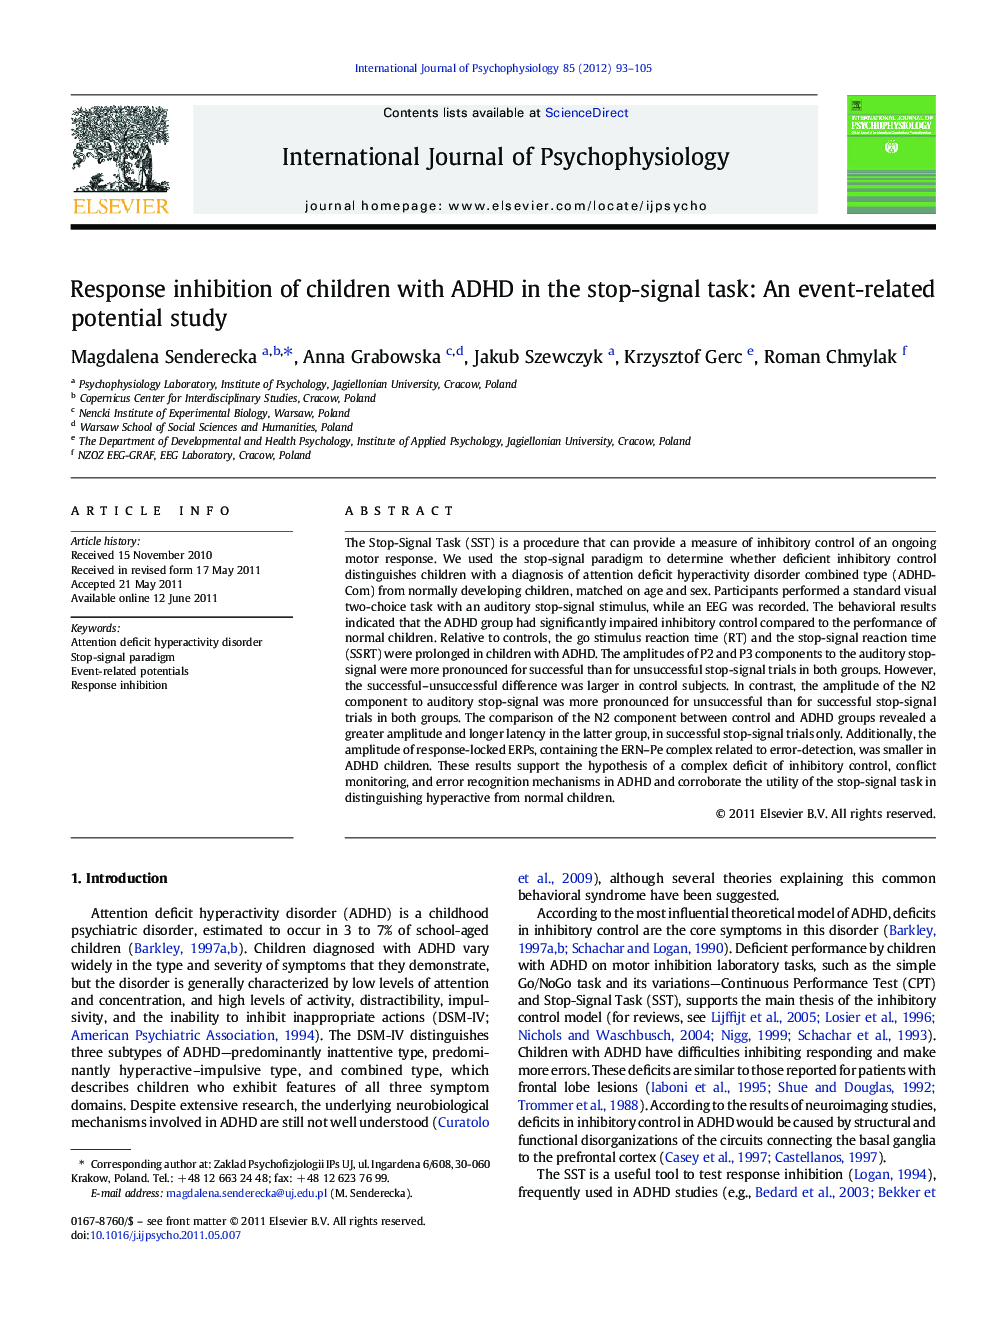 Response inhibition of children with ADHD in the stop-signal task: An event-related potential study